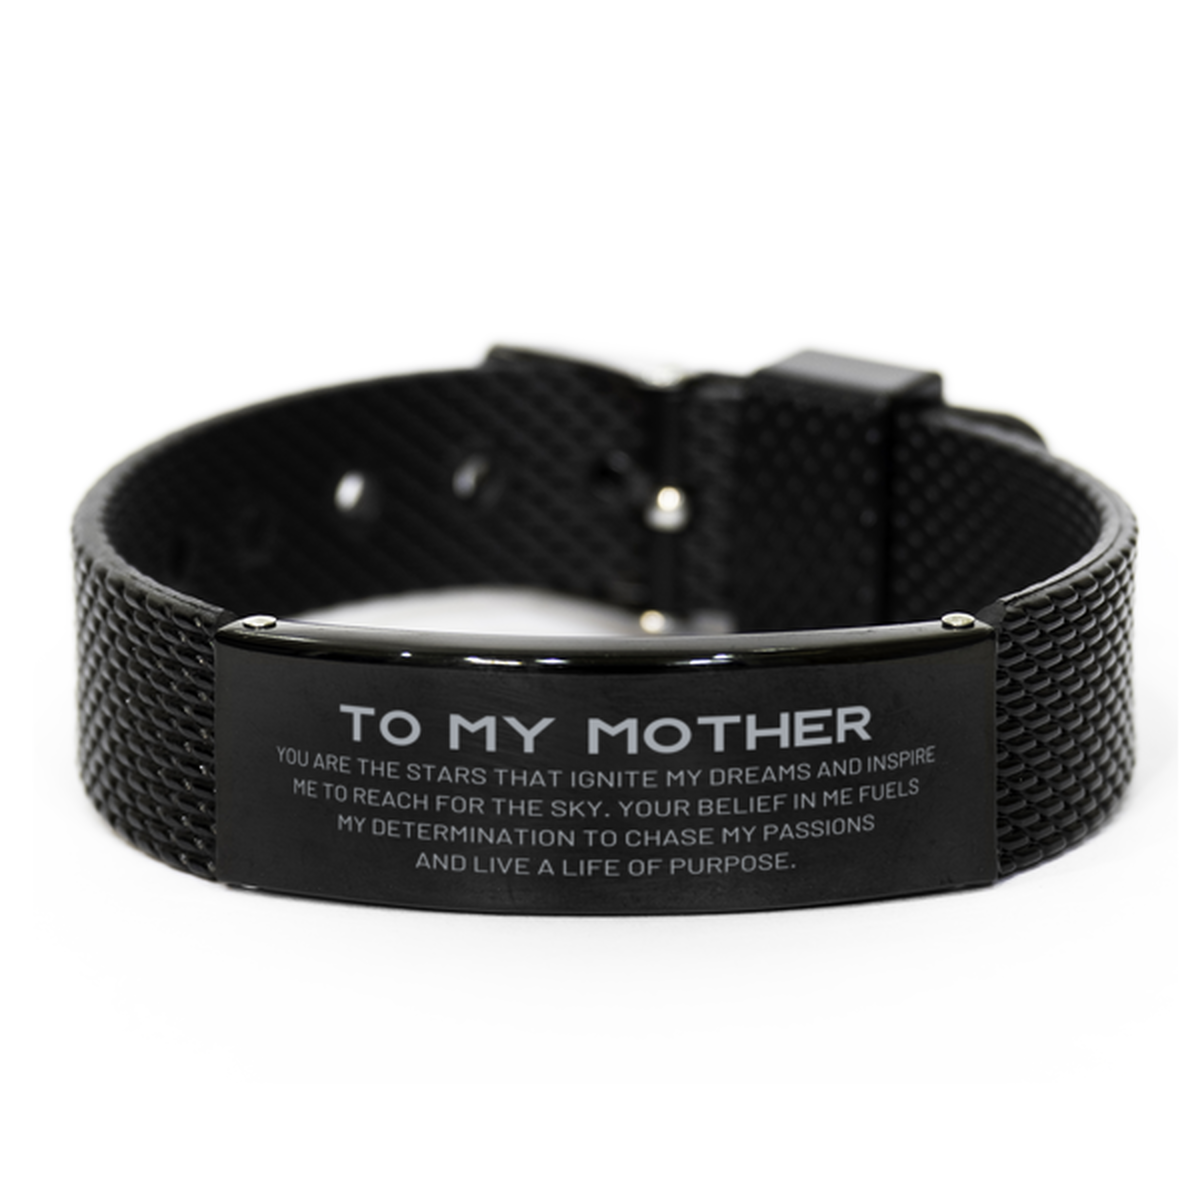 To My Mother Black Shark Mesh Bracelet, You are the stars that ignite my dreams and inspire me to reach for the sky, Birthday Unique Gifts For Mother, Thank You Gifts For Mother